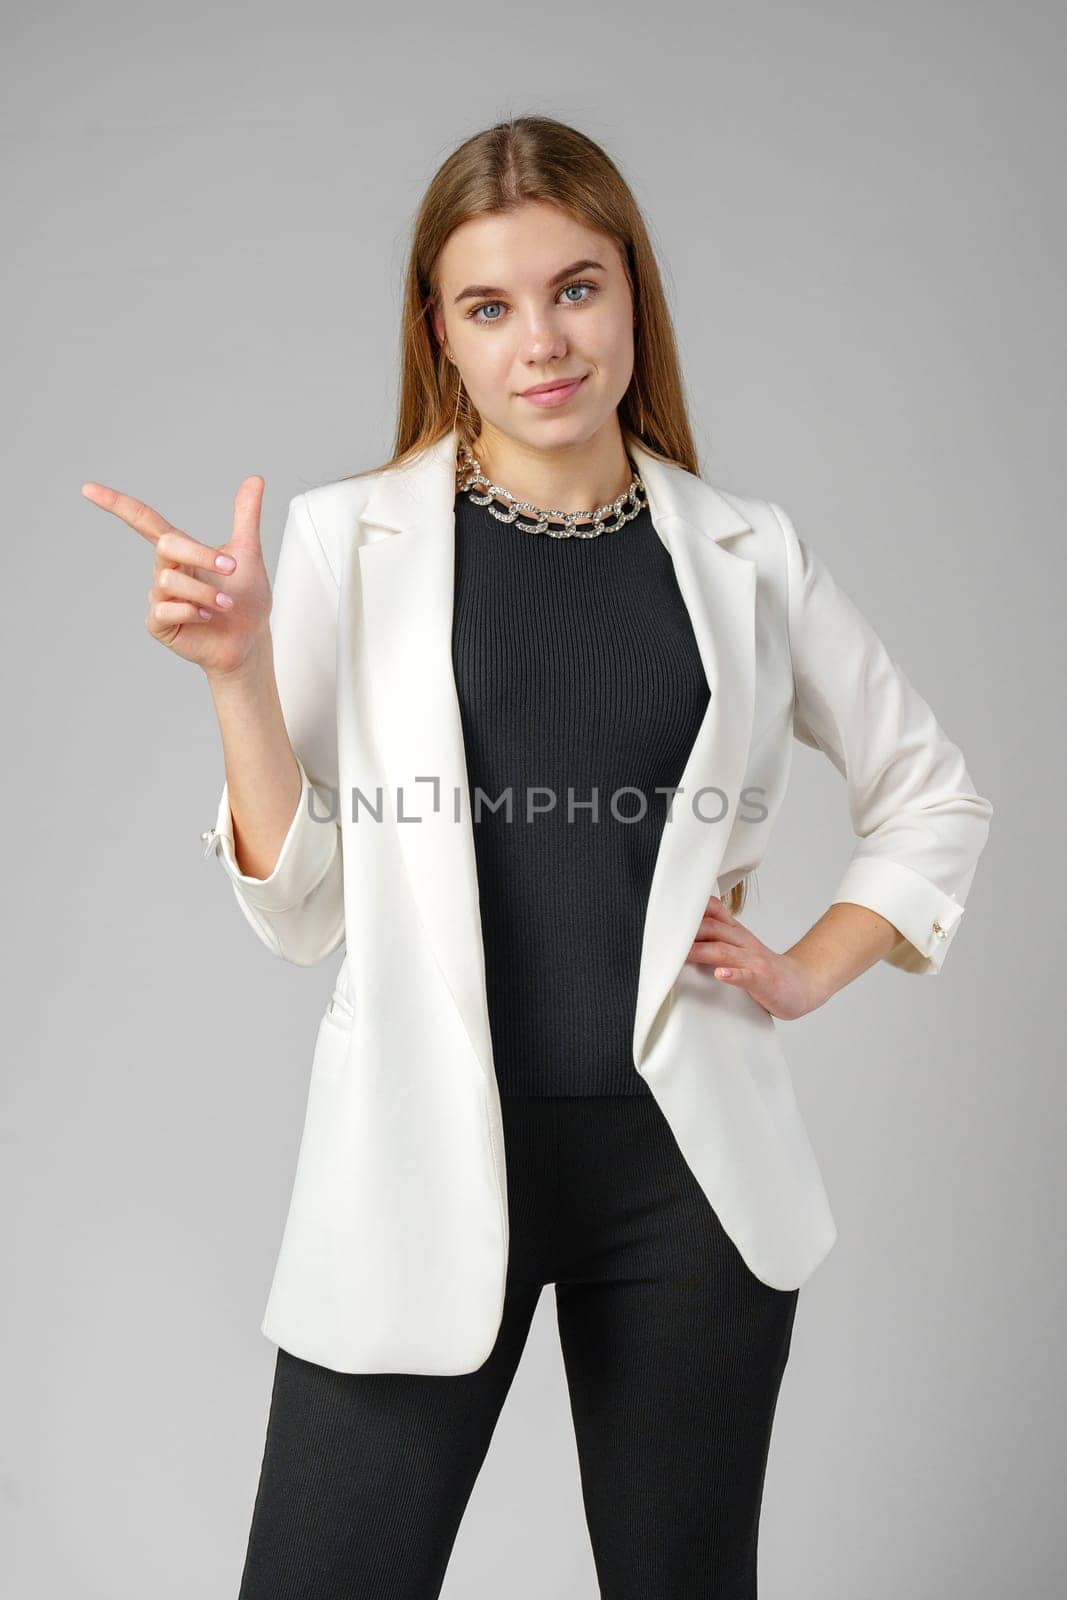 Confident Young Businesswoman Presenting With Hand Gesture in Studio Setting by Fabrikasimf